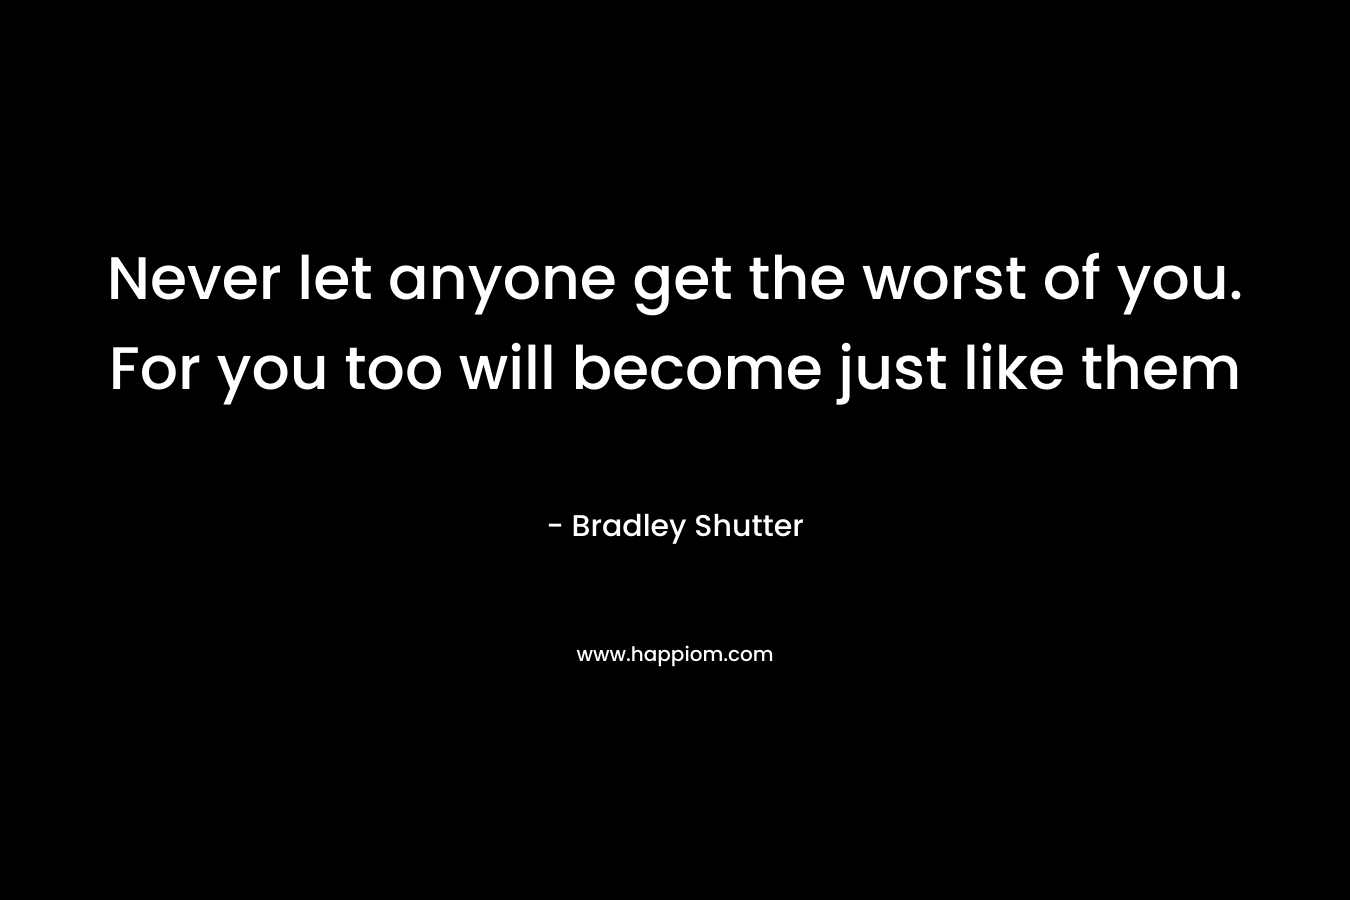 Never let anyone get the worst of you. For you too will become just like them – Bradley Shutter